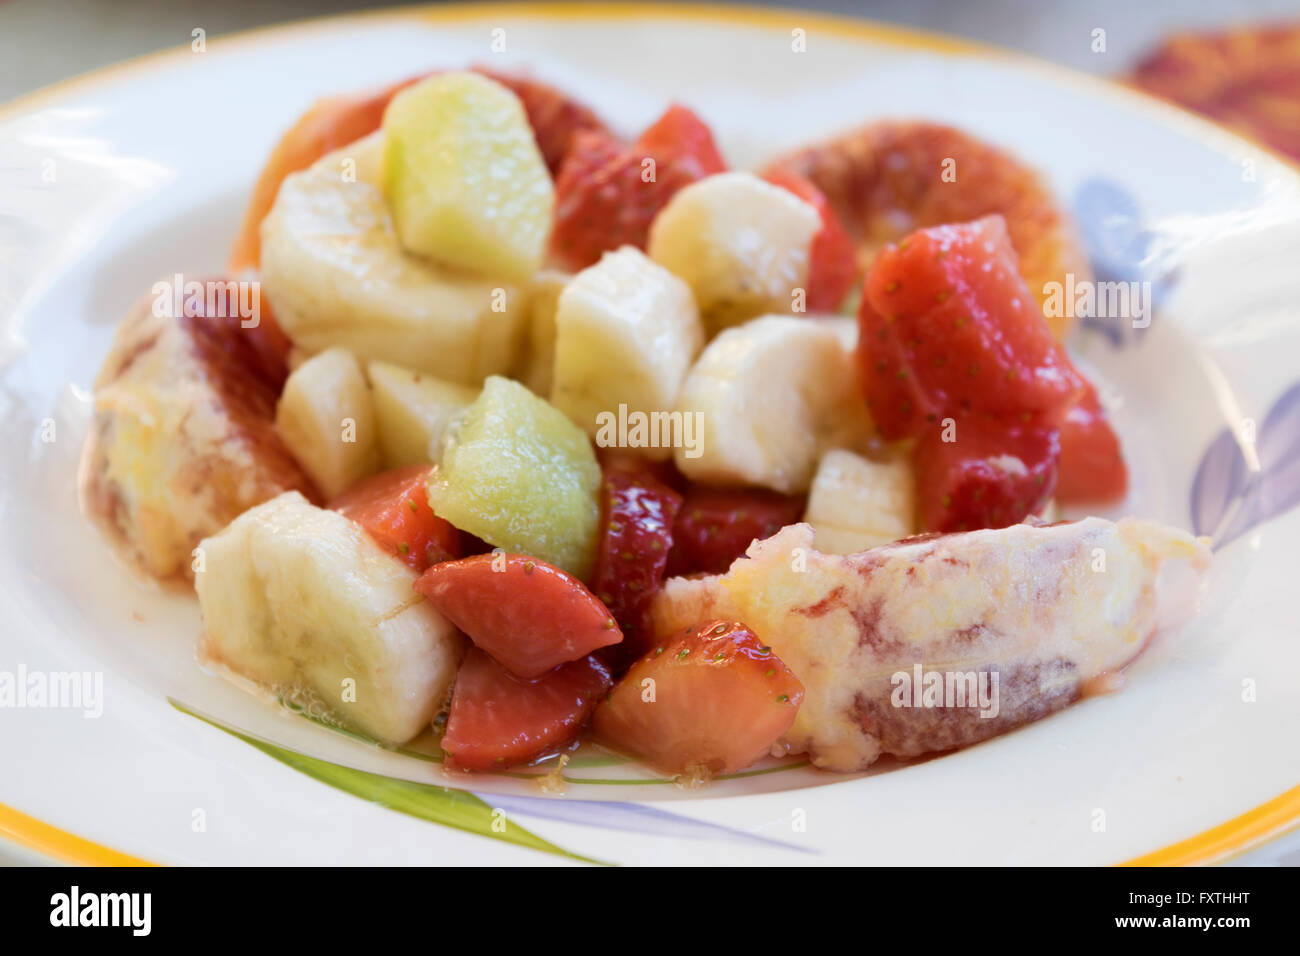 macedoine of fresh and colored fruit with strawberries oranges apples and bananas Stock Photo